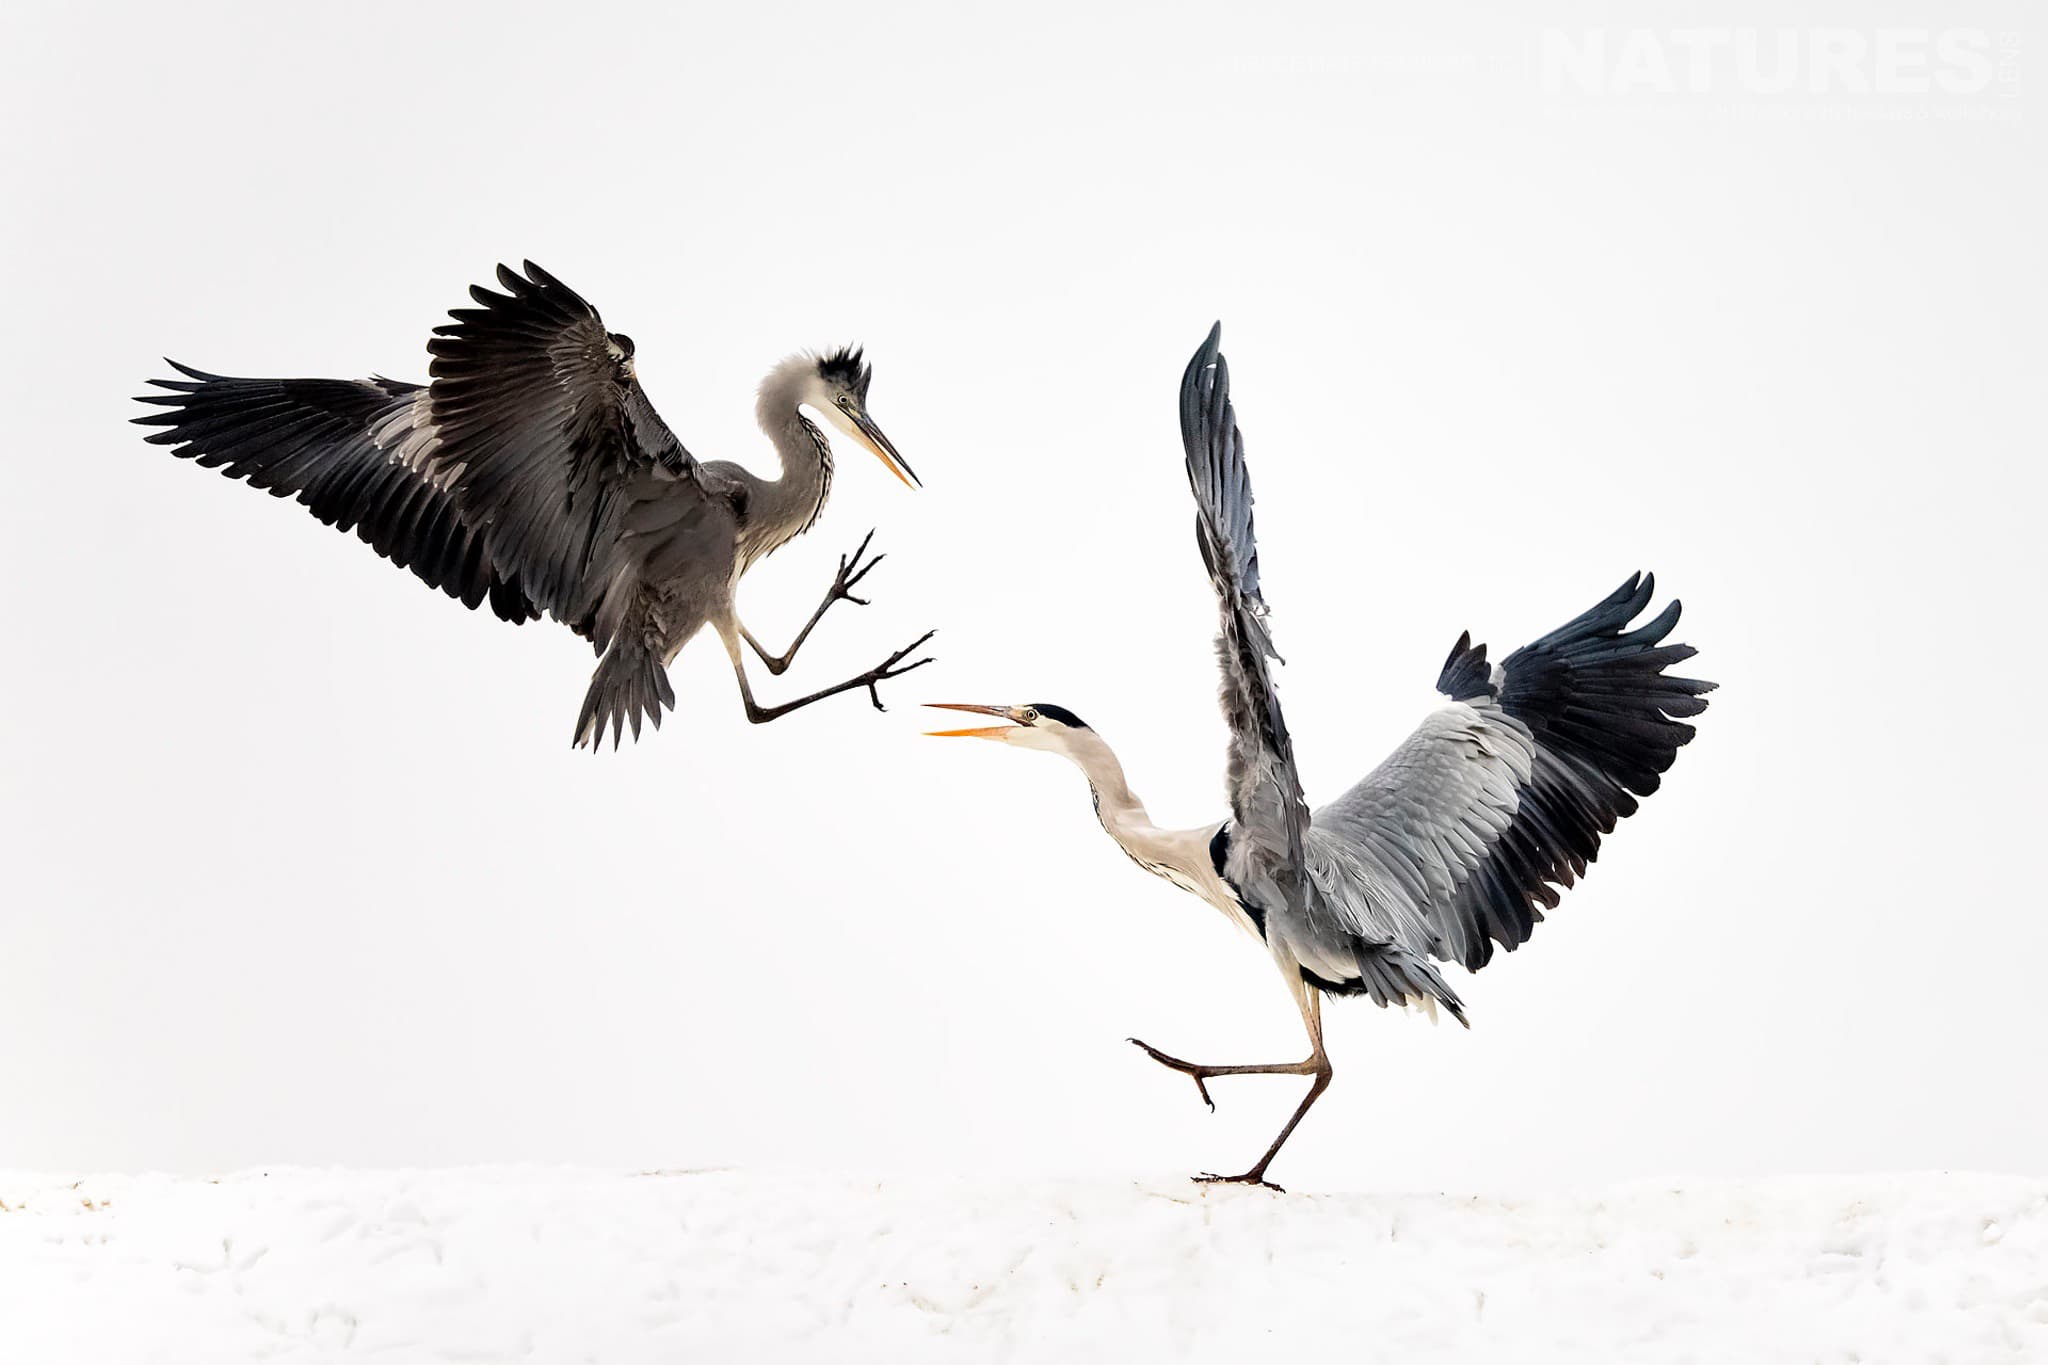 Fighting herons at Bence Máté's Photography Hides during the Hungarian Winter